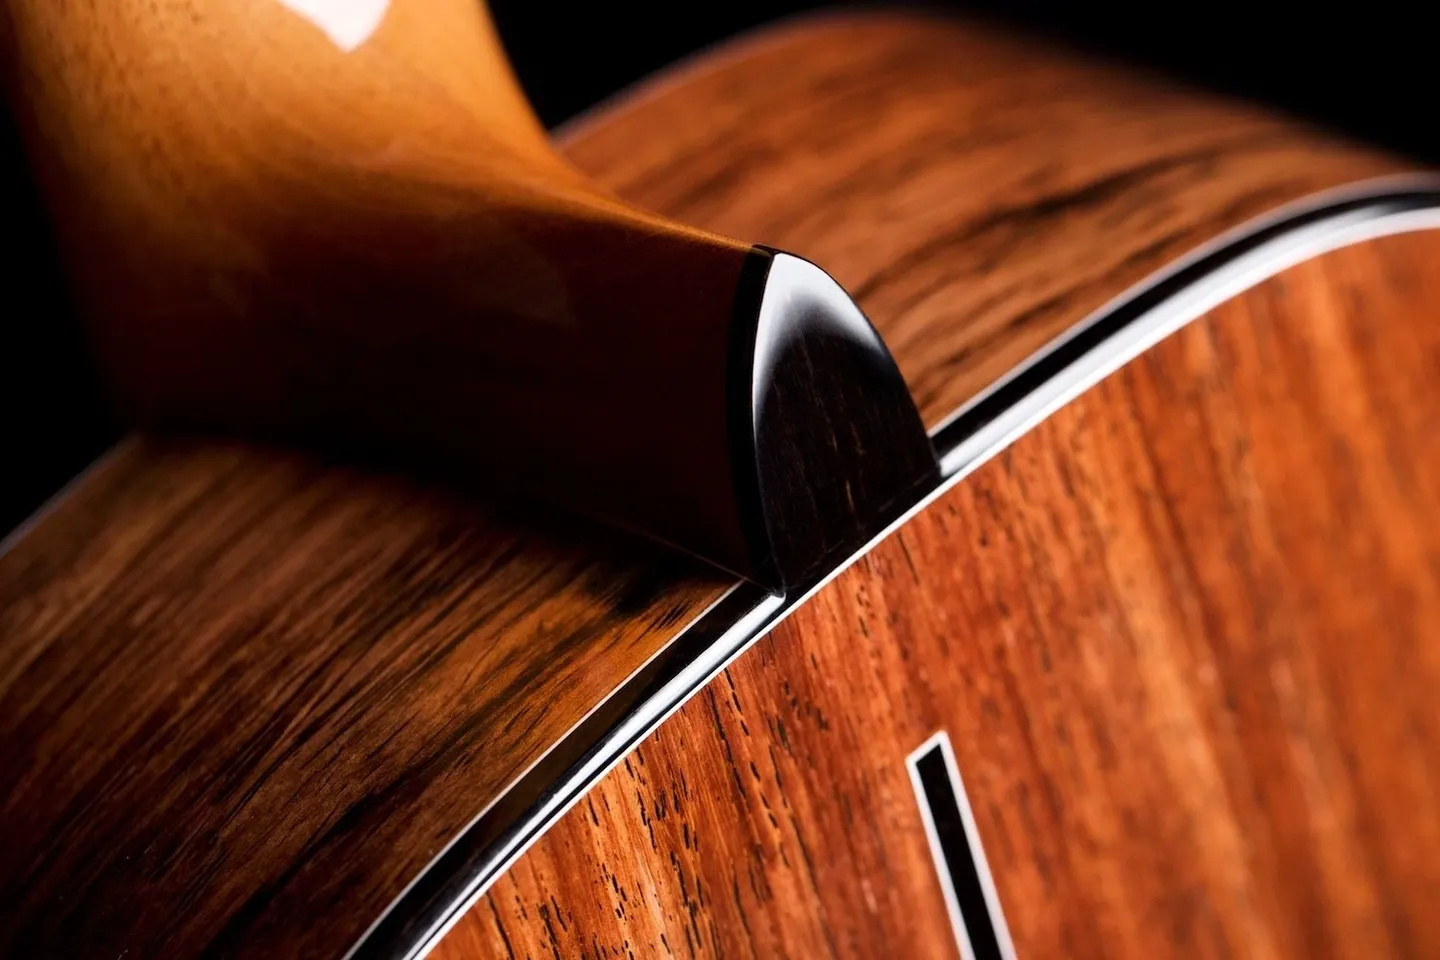 A close-up shot of the polished guitar